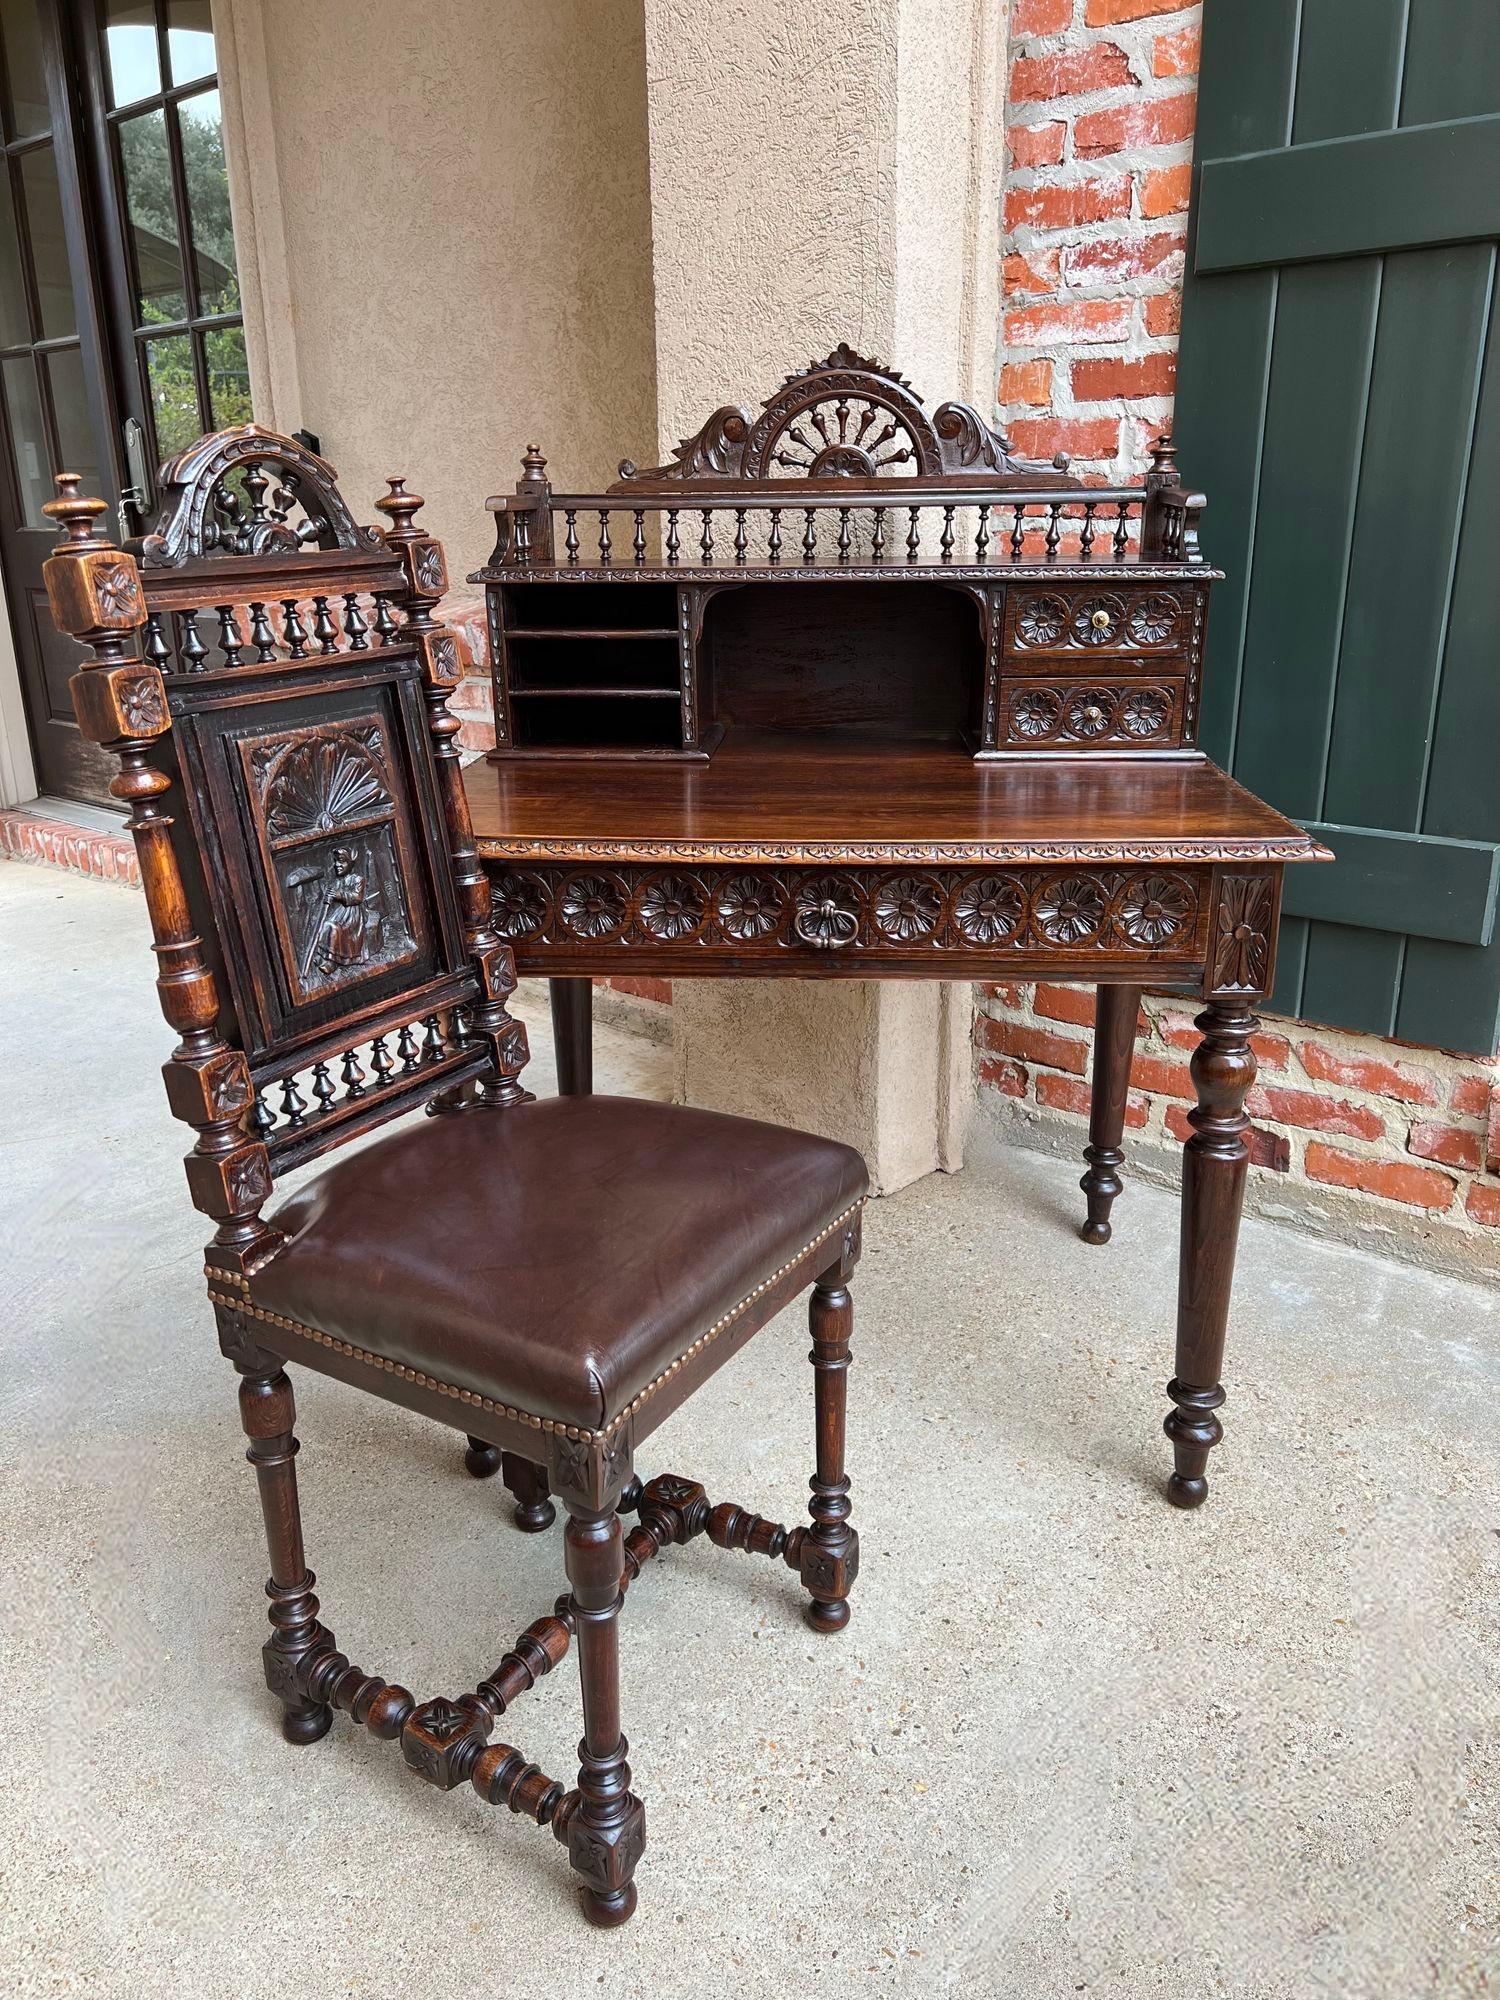 Antique French Carved Oak Writing Desk Secretary AND Chair Breton Brittany SET.

Direct from France, a wonderful antique French writing desk AND chair set with intricate Brittany detailsThe stunning writing desk features carvings around a ‘ship’s